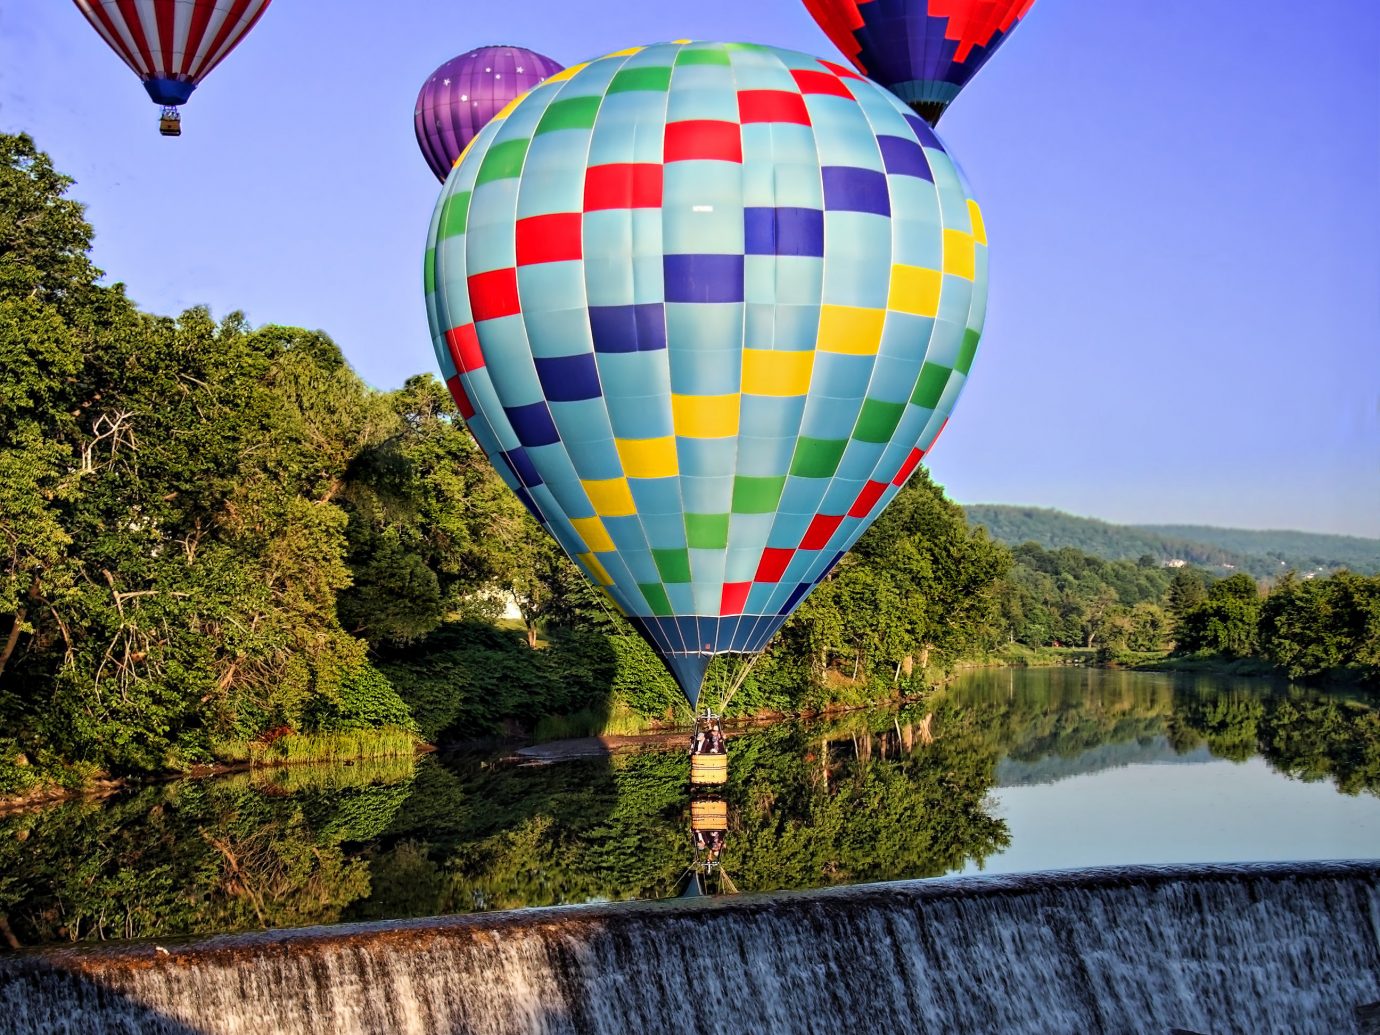 Food + Drink Outdoors + Adventure Trip Ideas Weekend Getaways balloon transport aircraft hot air ballooning Hot Air Balloon Nature outdoor colorful sky atmosphere of earth daytime tourism fun leisure colored